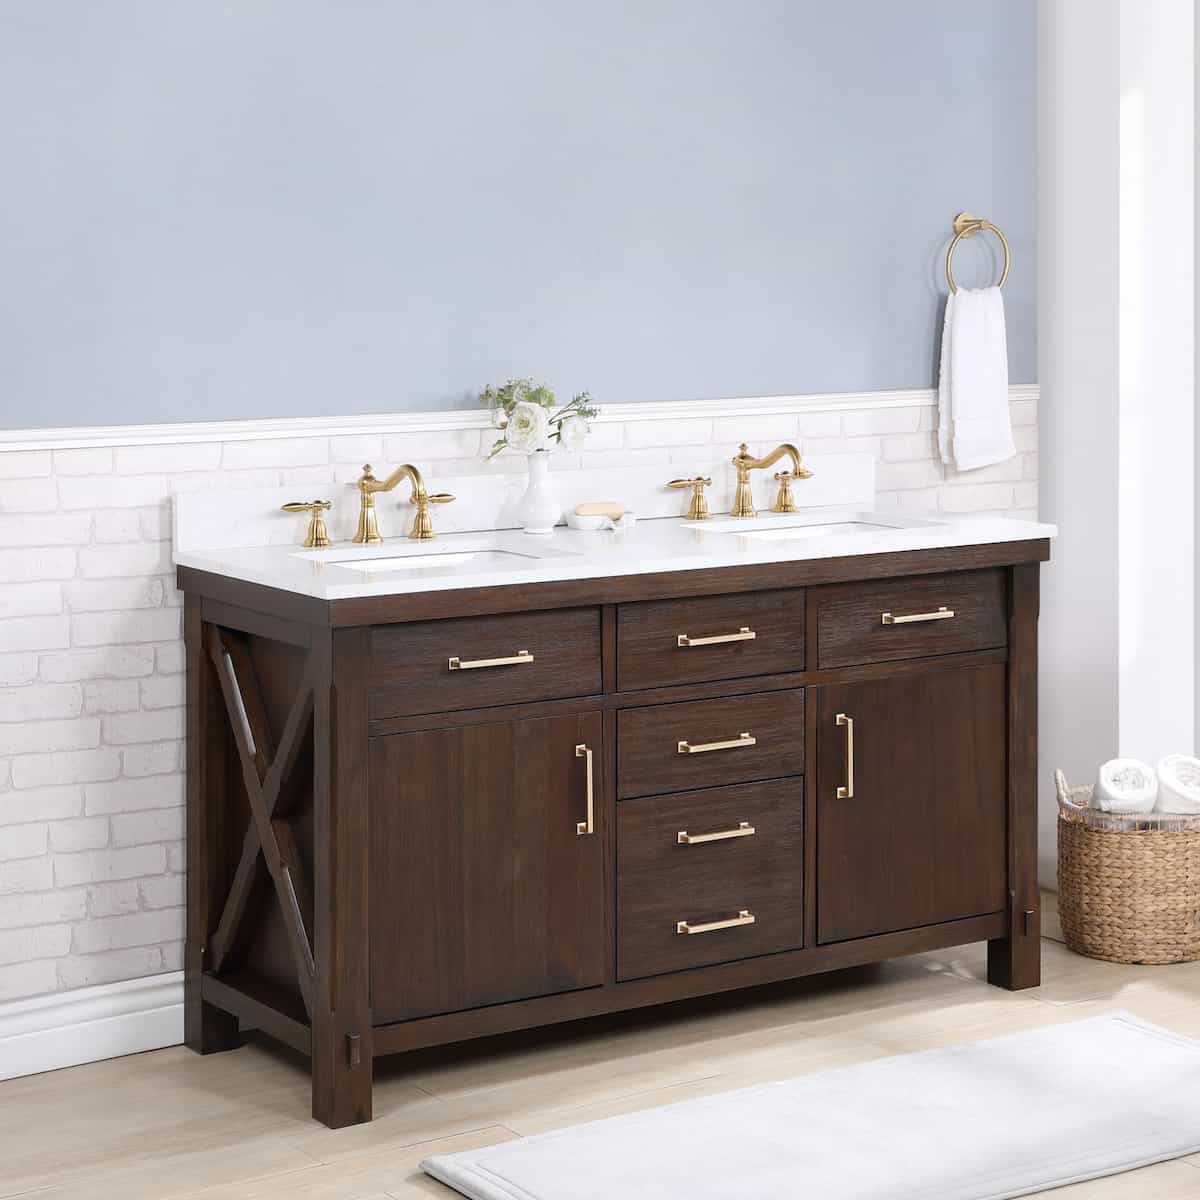 Vinnova Viella 60 Inch Double Sink Bath Vanity in Deep Walnut with White Composite Countertop Without Mirror Side 701860-DW-WS-NM